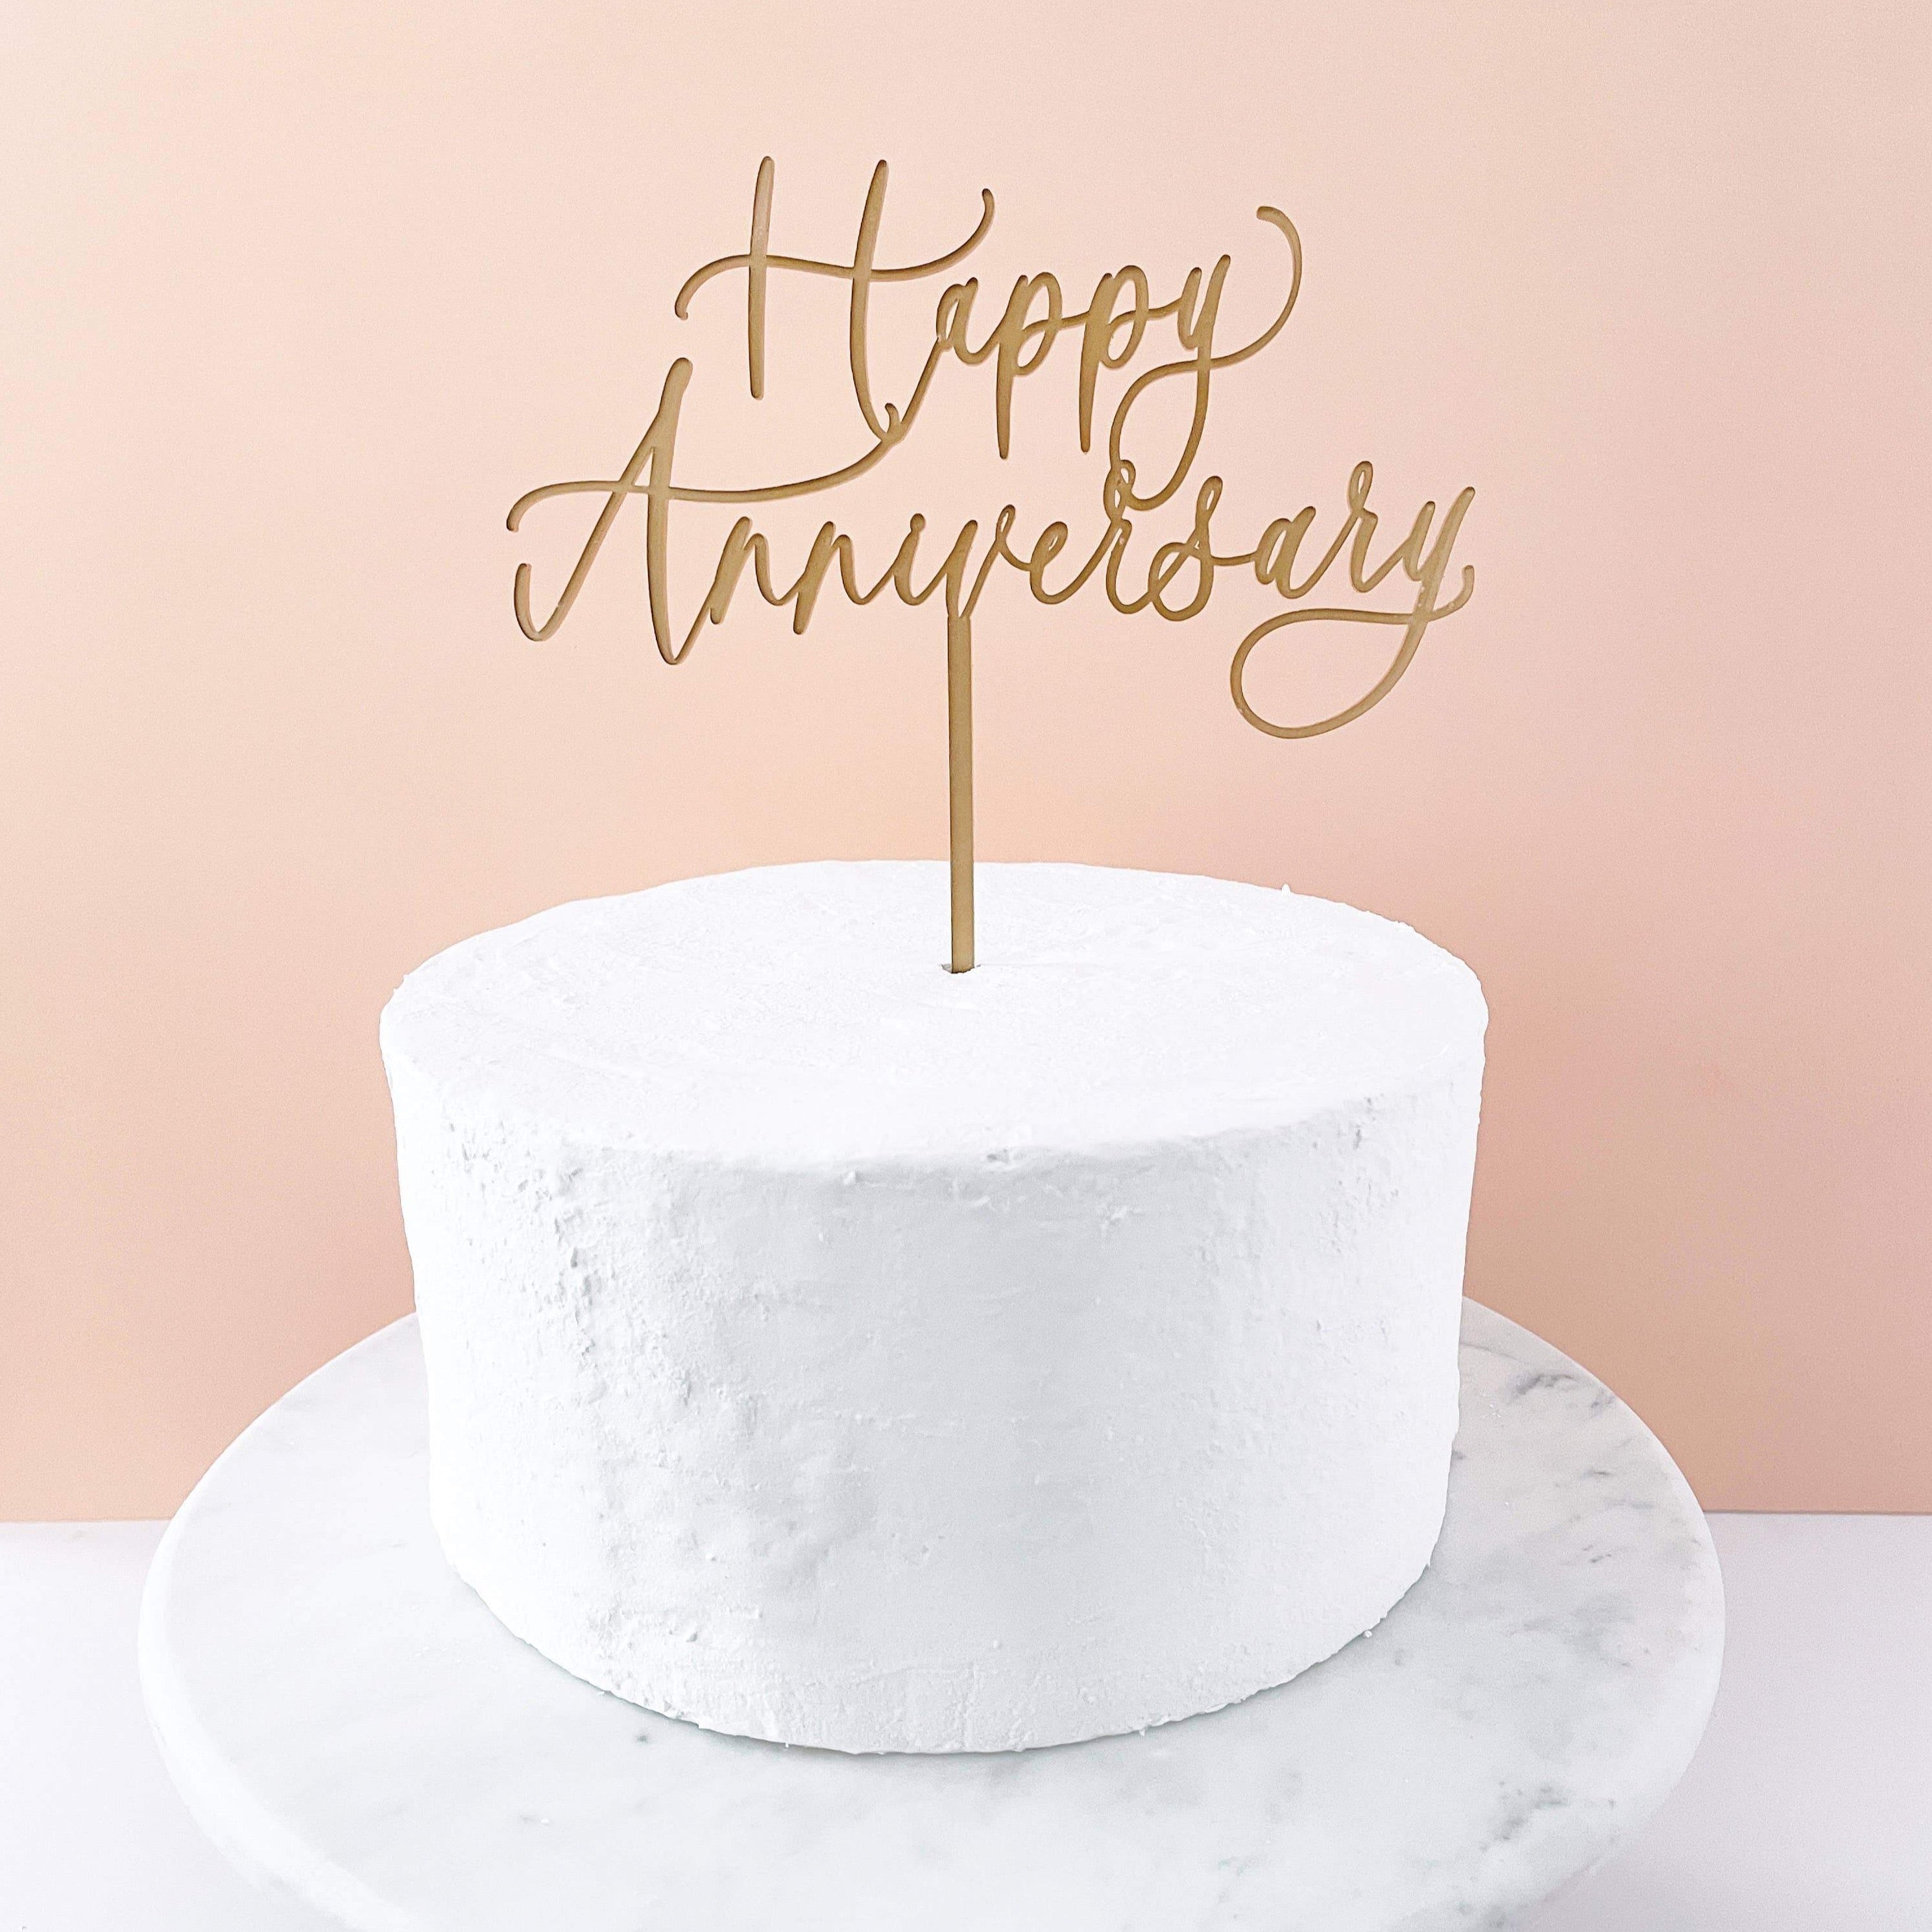 40th Wedding anniversary cake, for my parents. ❤ | Anniversary cake  designs, 40th anniversary cakes, Simple anniversary cakes